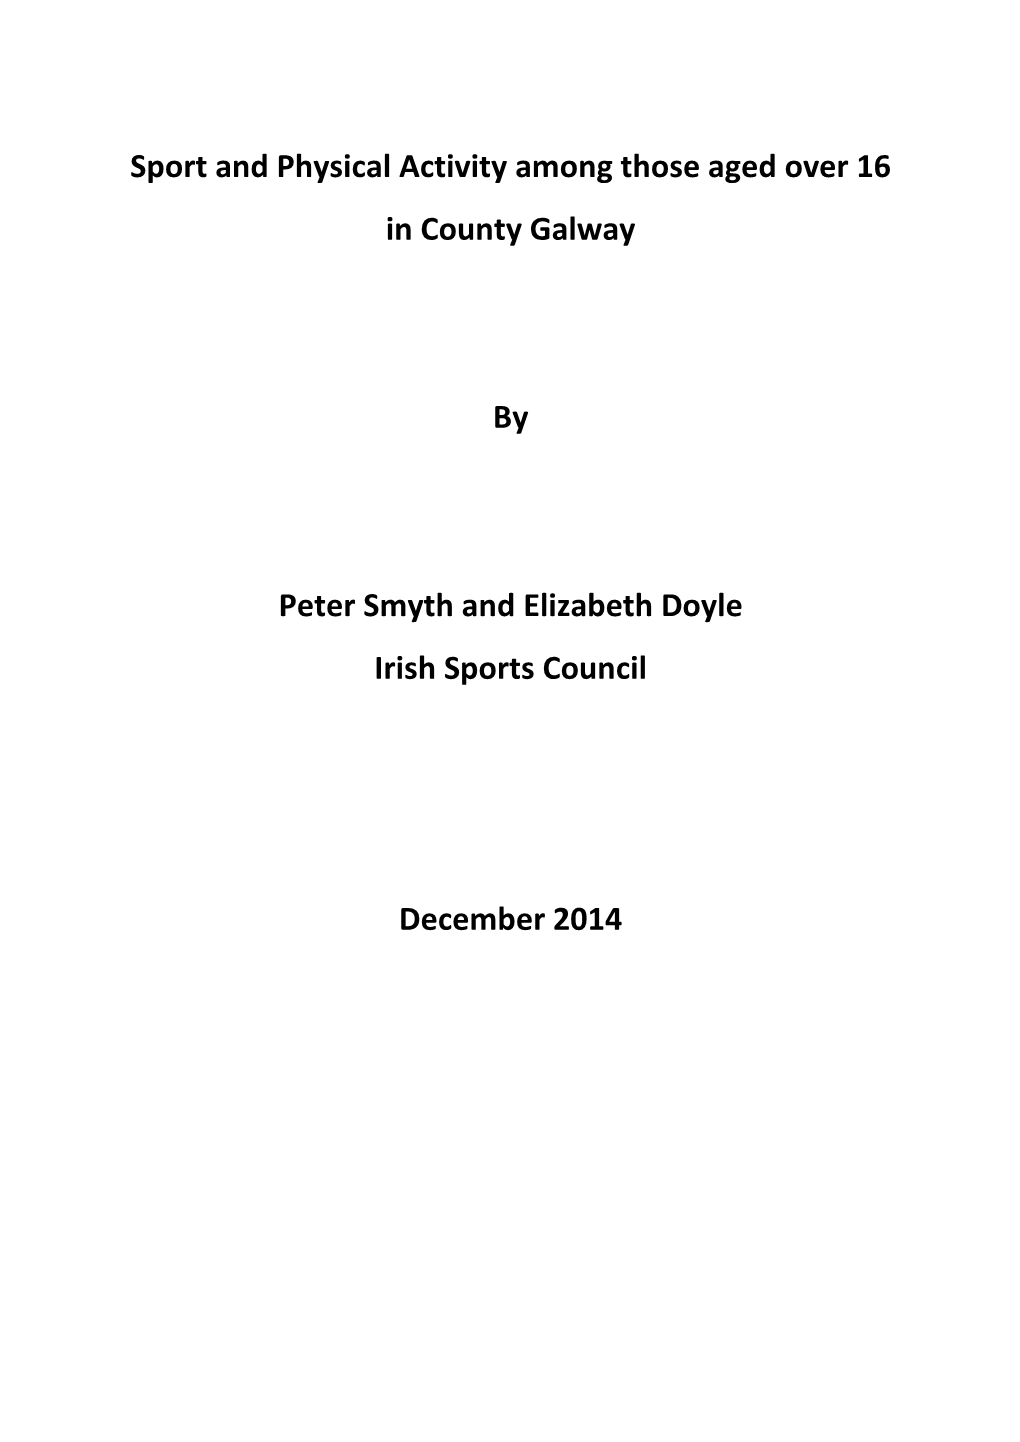 Sport and Physical Activity Among Those Aged Over 16 in County Galway